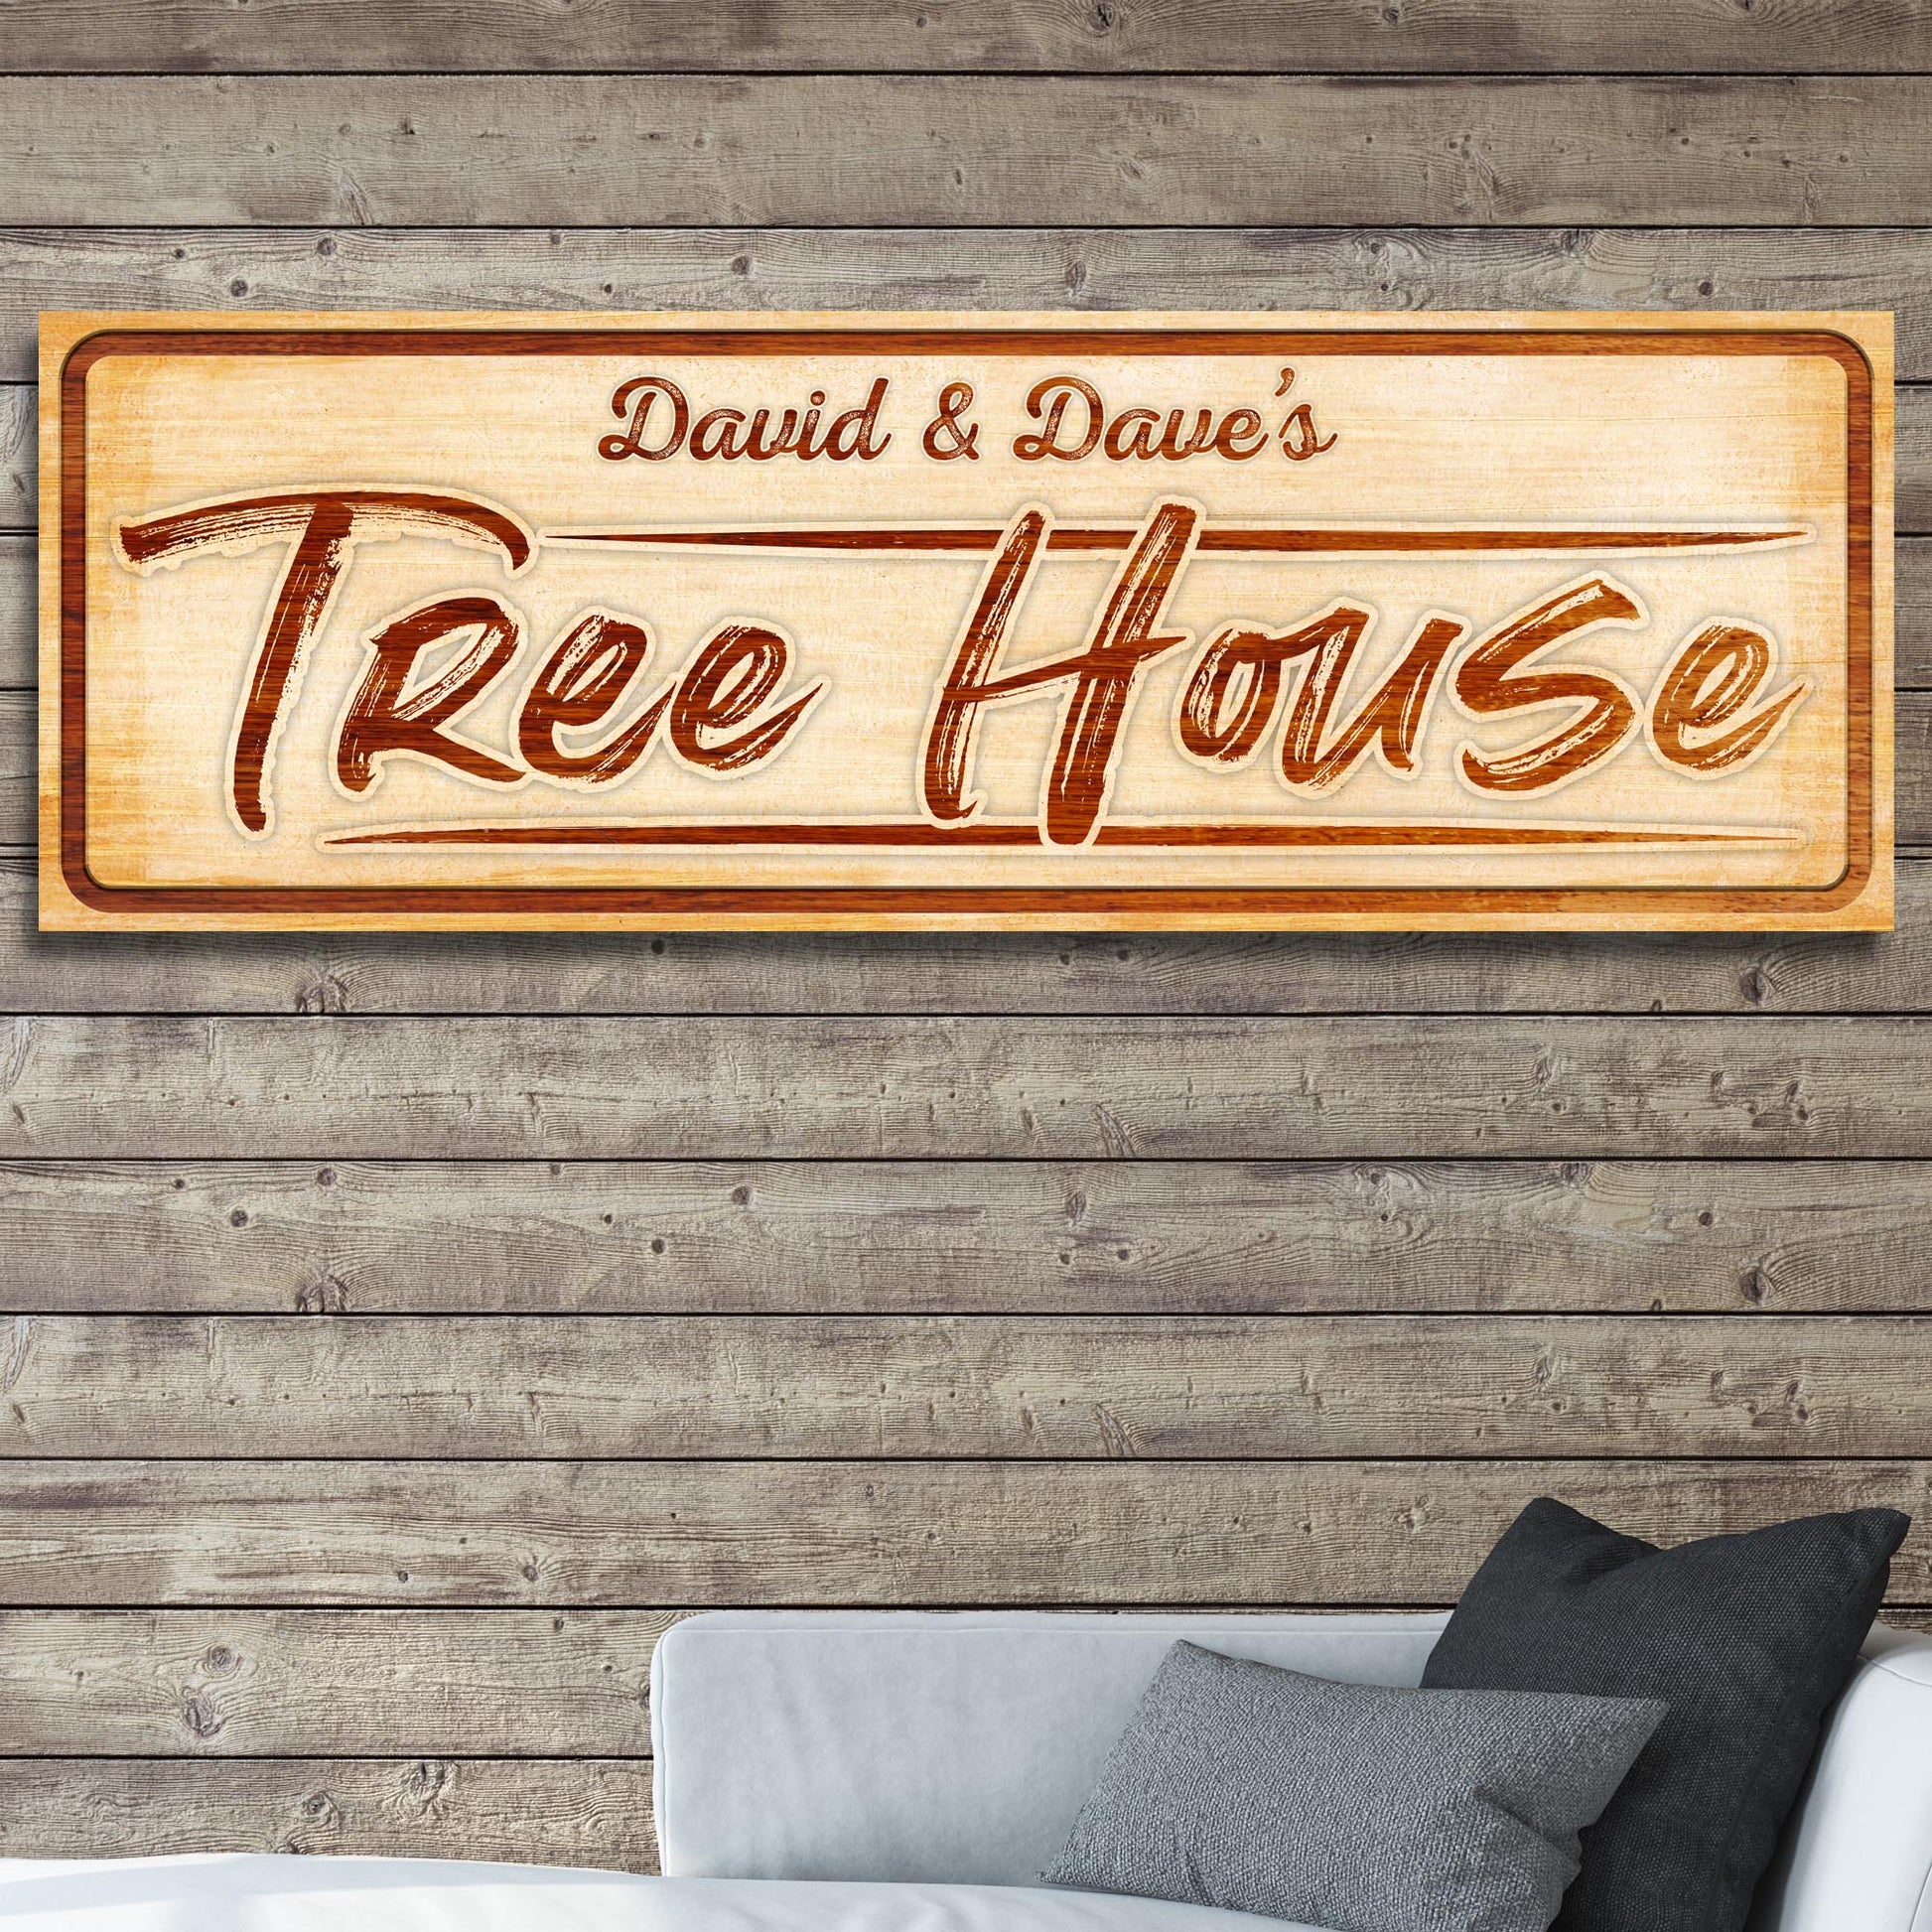 Kid Tree House Sign - Image by Tailored Canvases